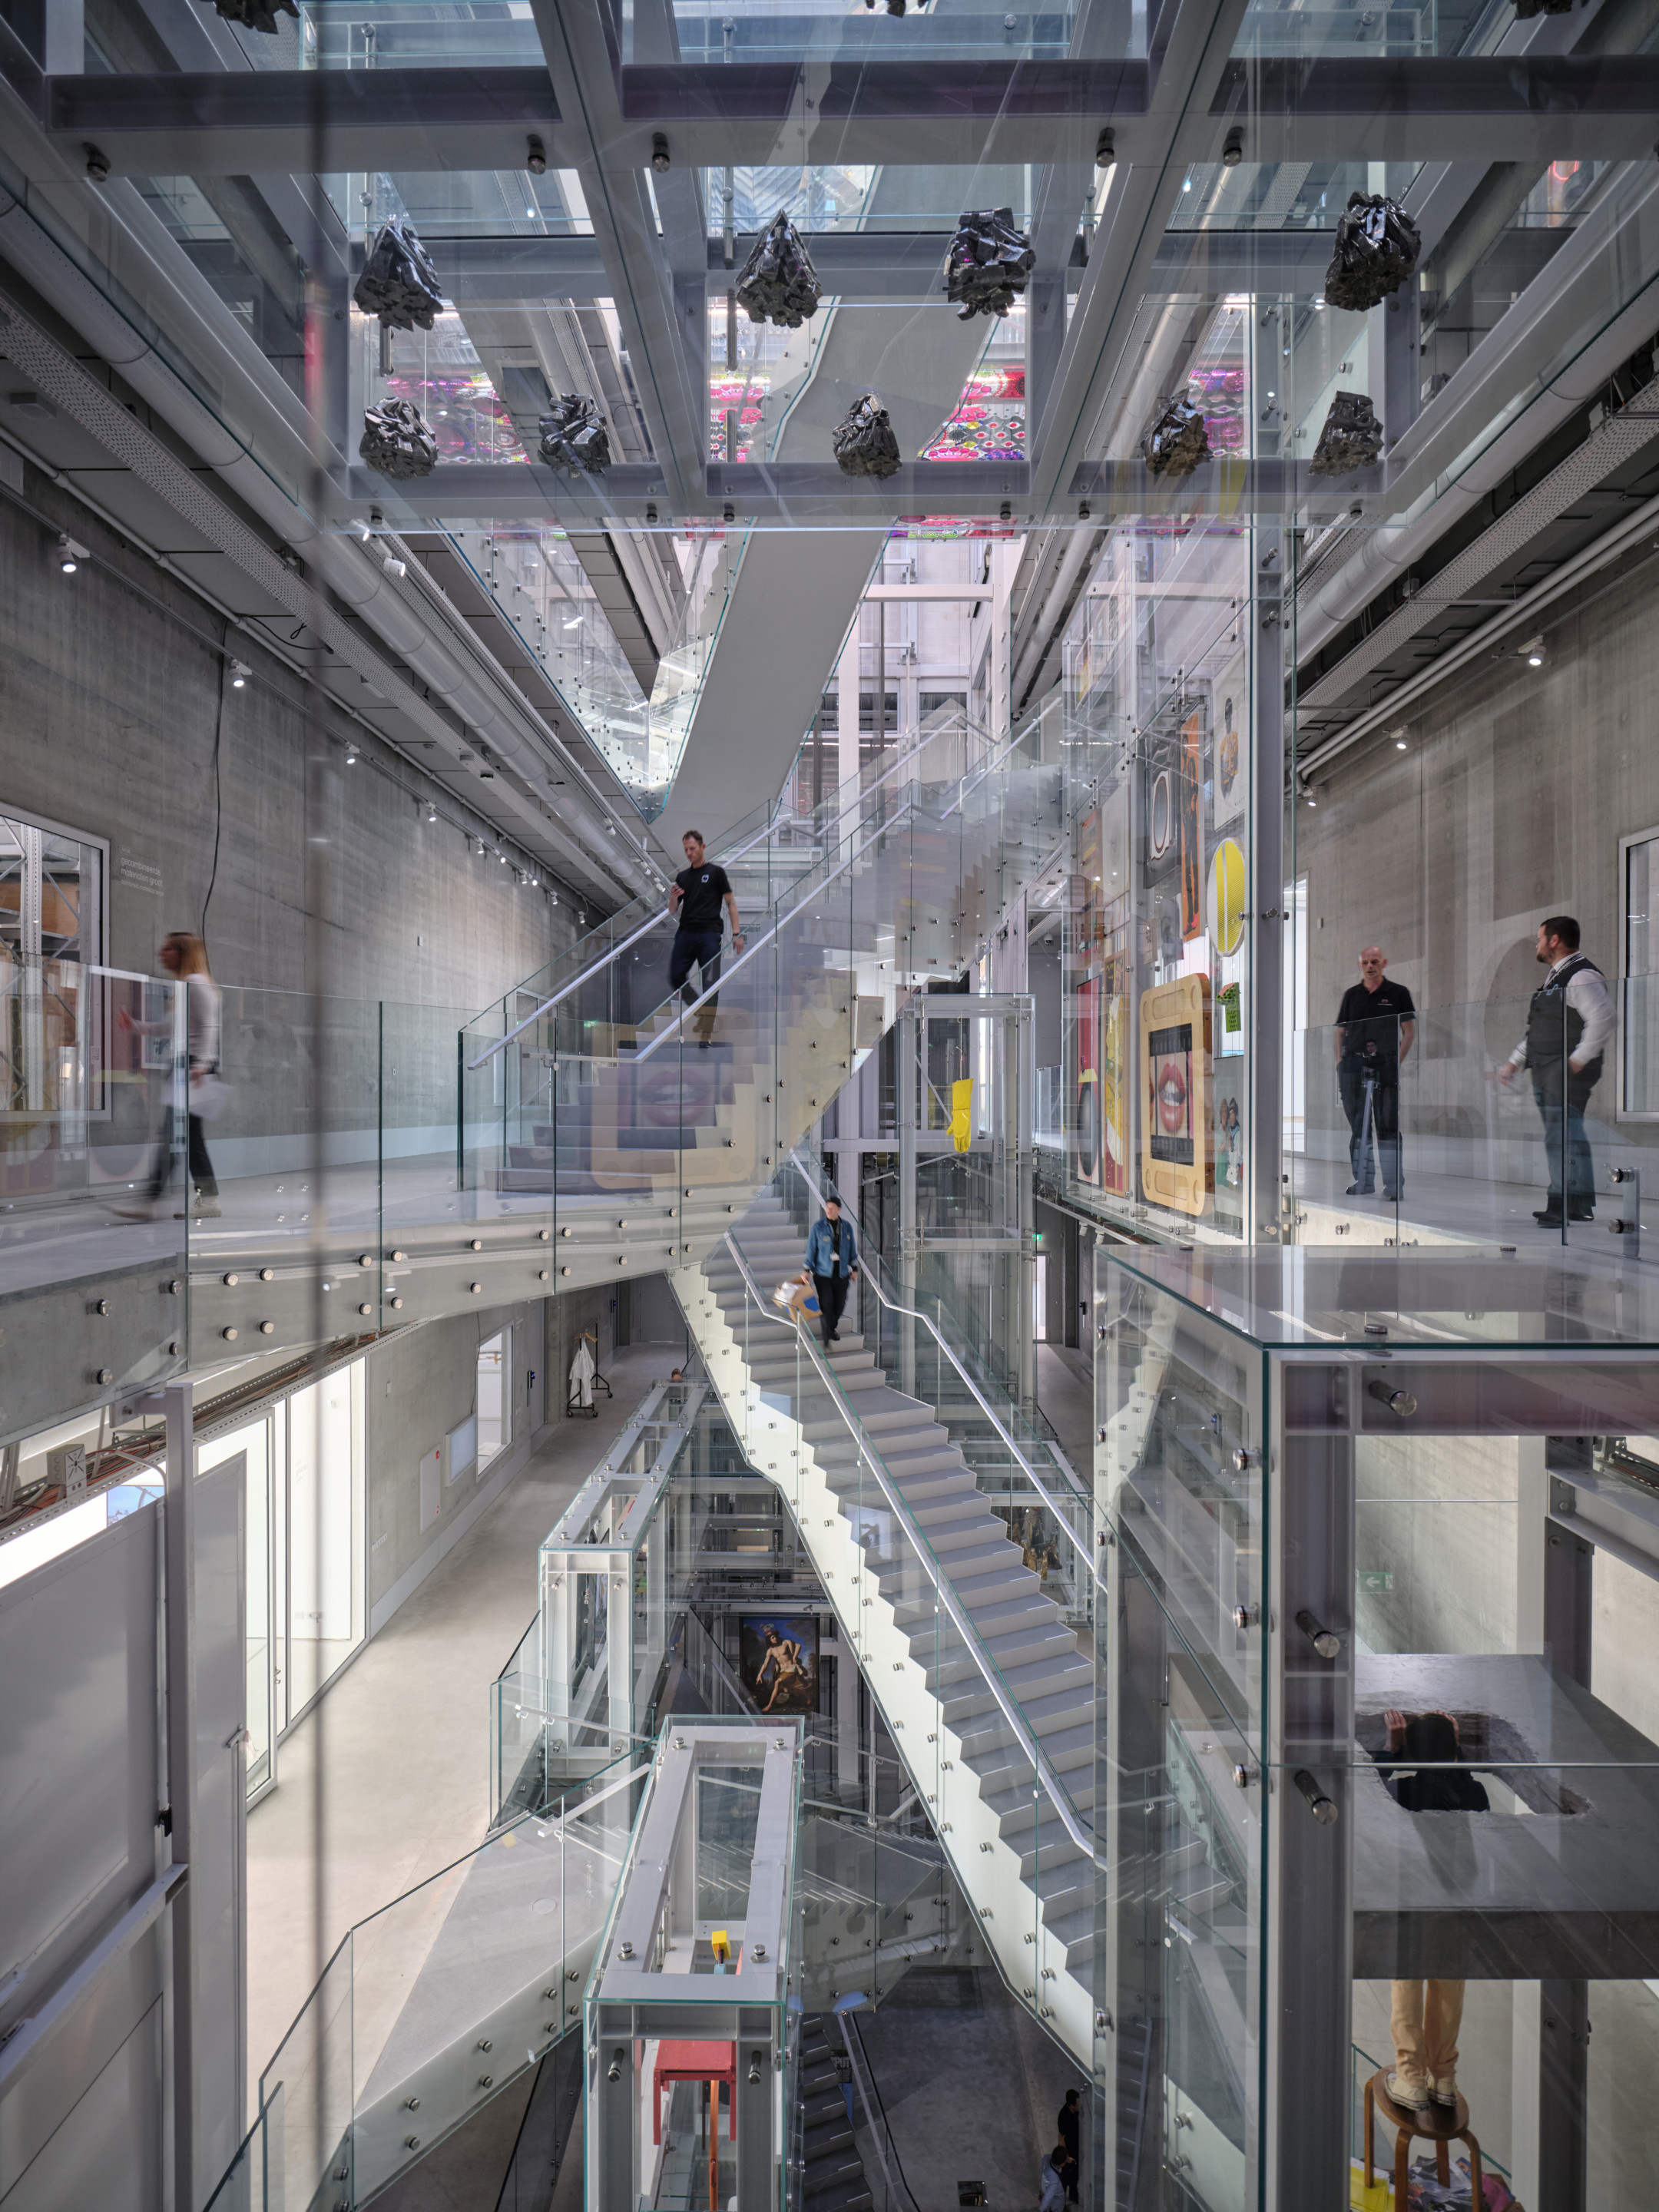 people view art storage organized around an atrium with criss-crossing staircases